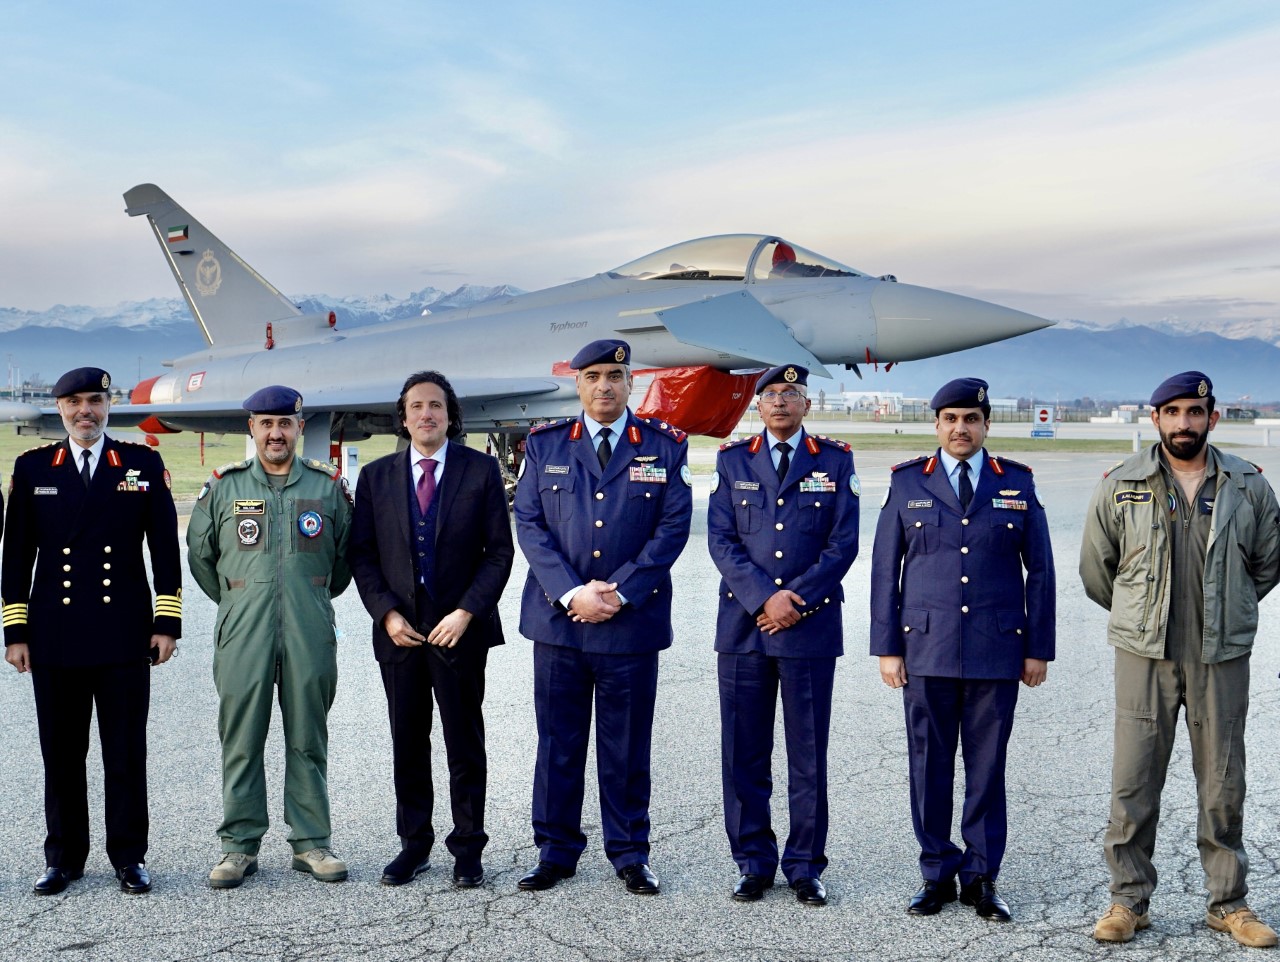 Kuwait's Ambassador to Italy and Deputy Commander of the Air Force with other military top brass